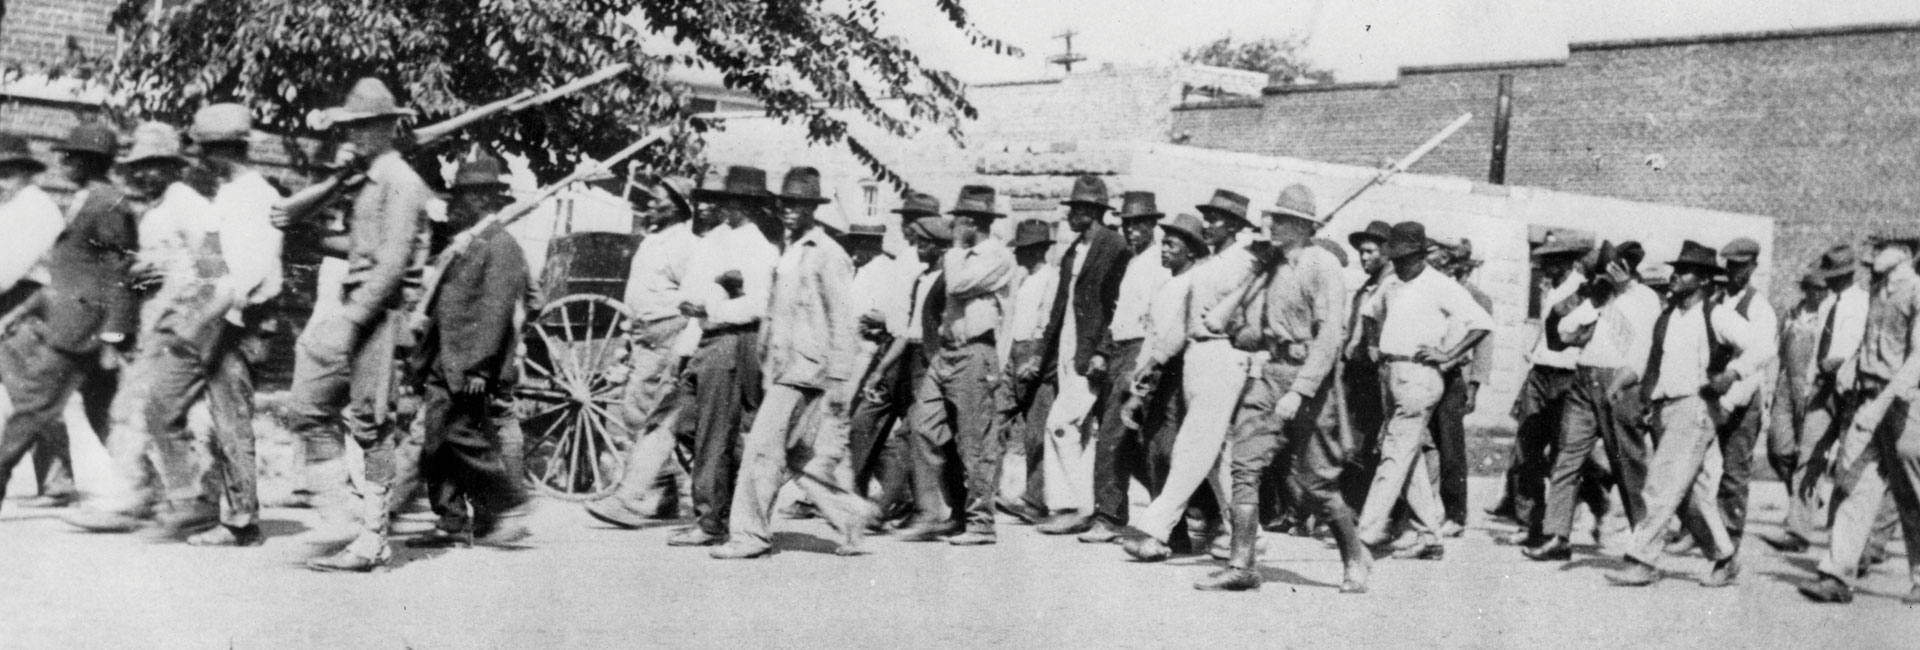 National Guard troops escort unarmed Black men to the detention center at Convention Hall after the Tulsa Race Massacre.